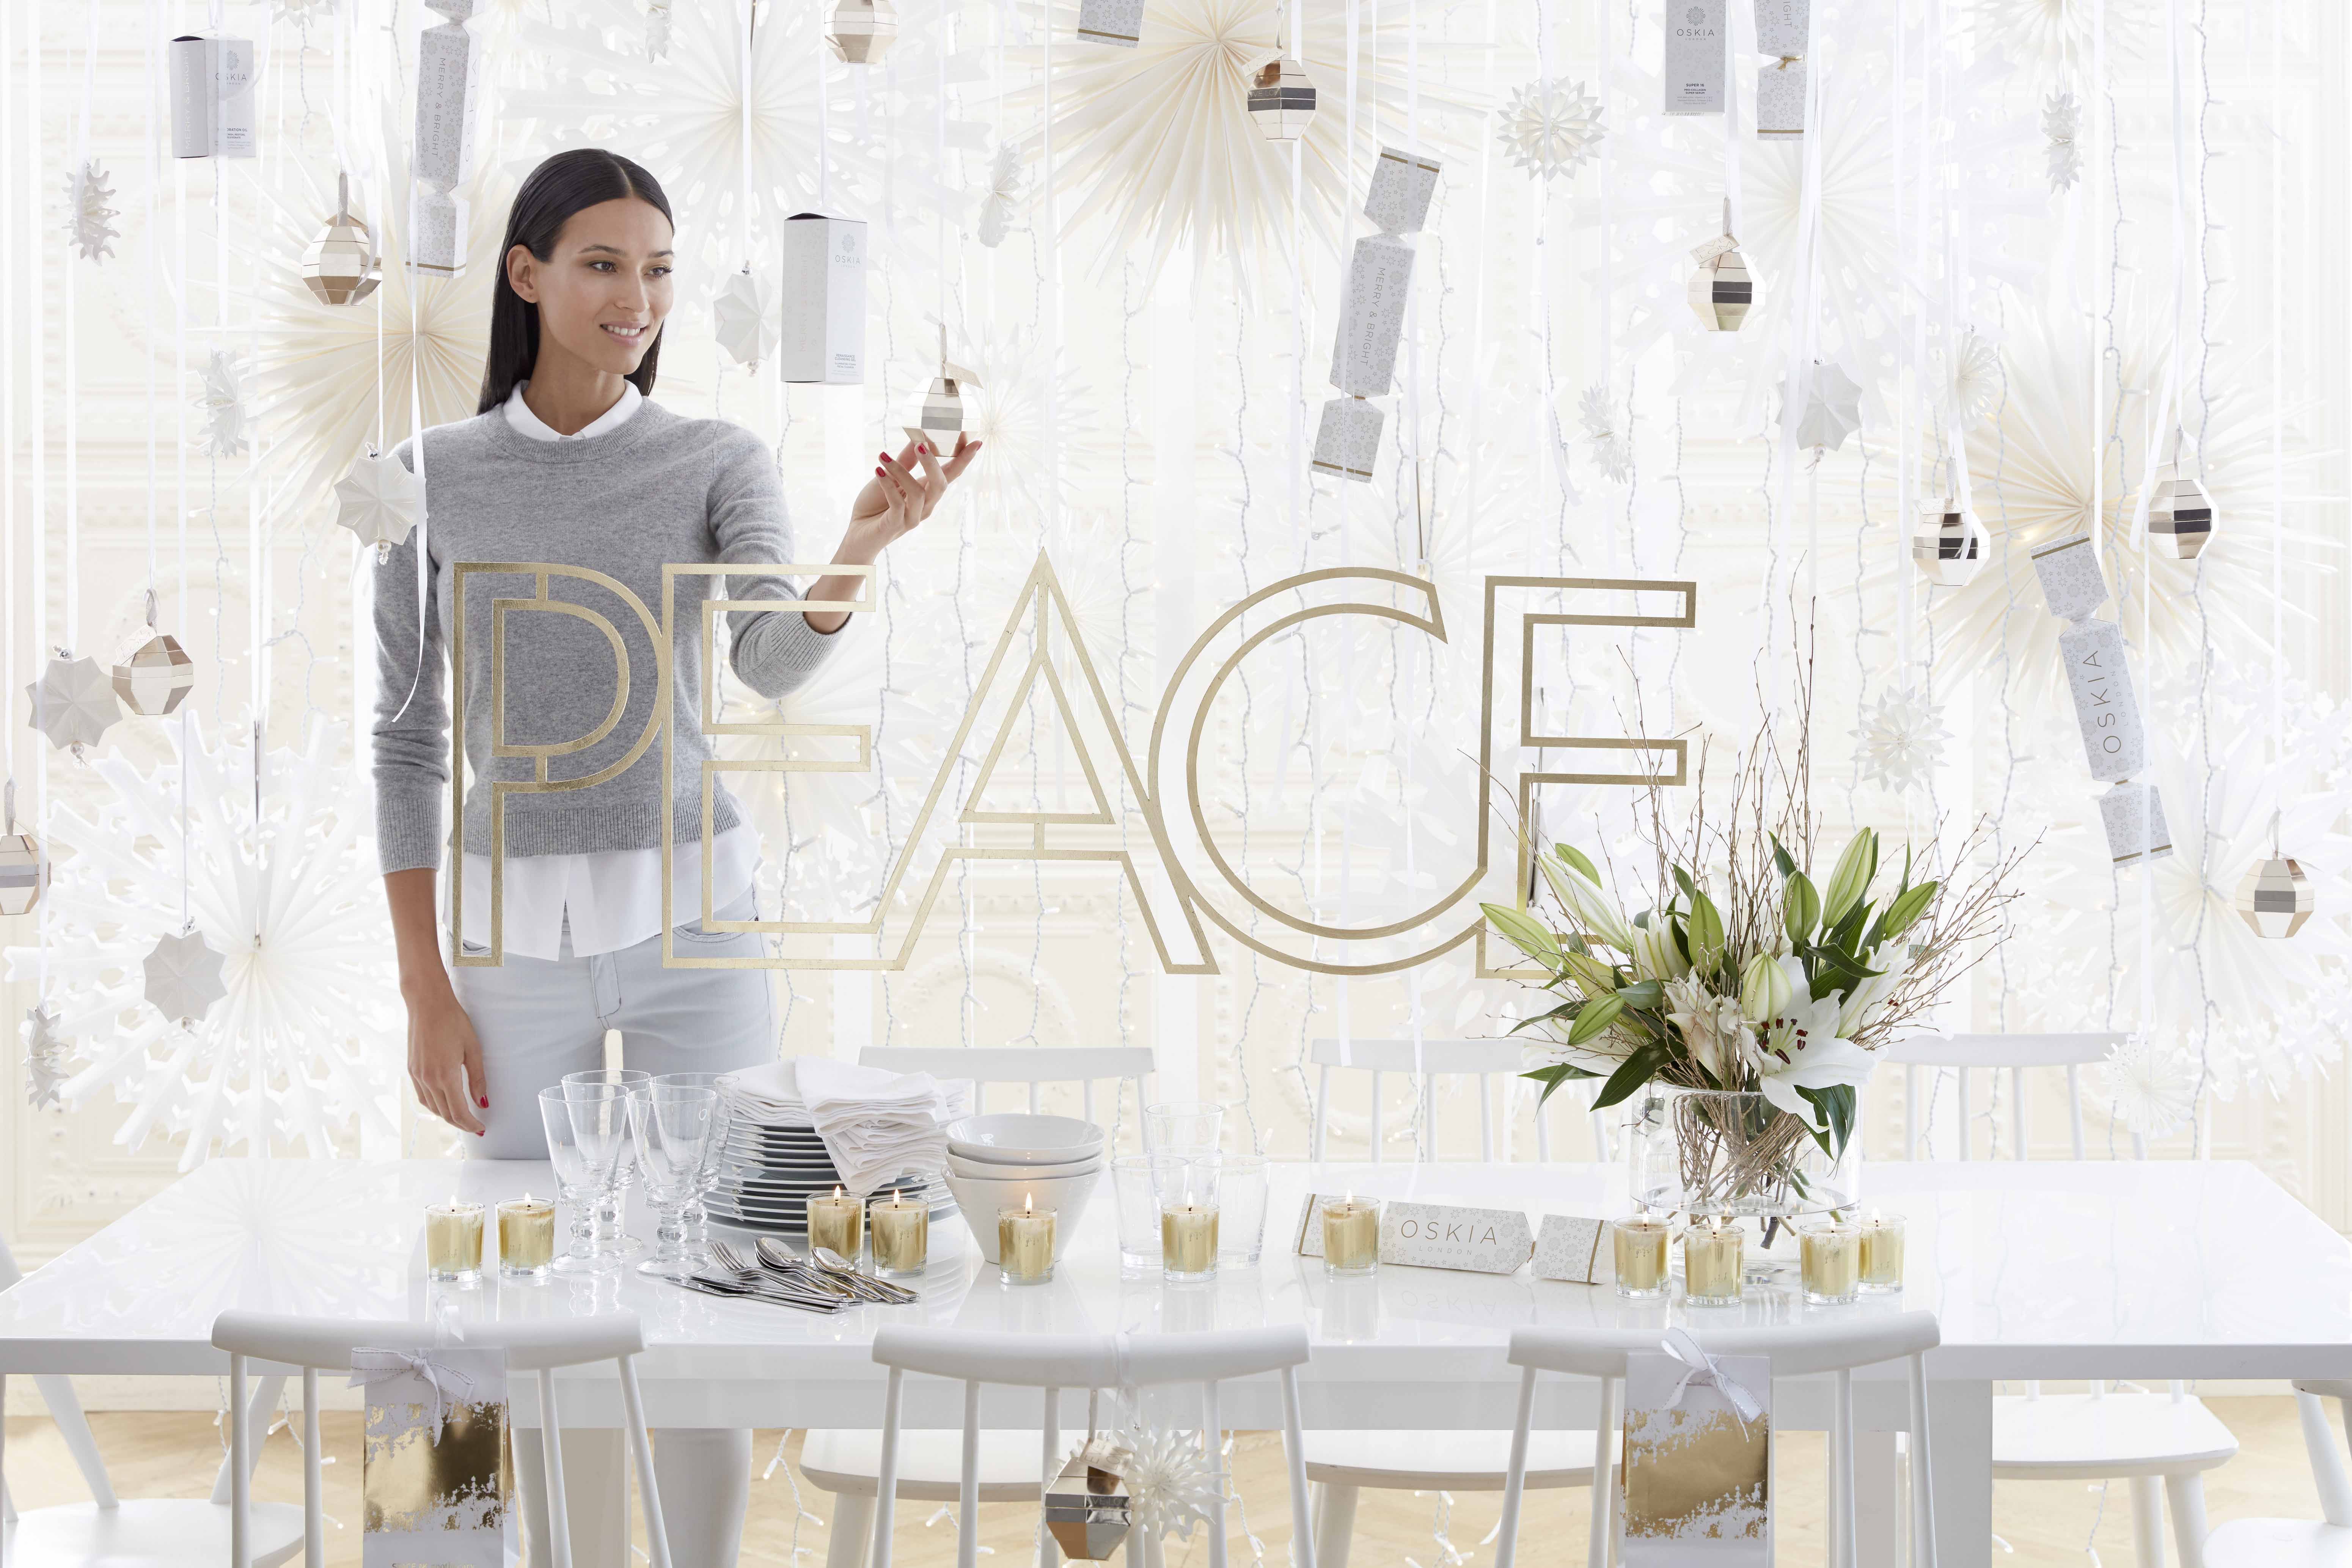 Space NK is promoting the theme of diversity for Christmas 2016